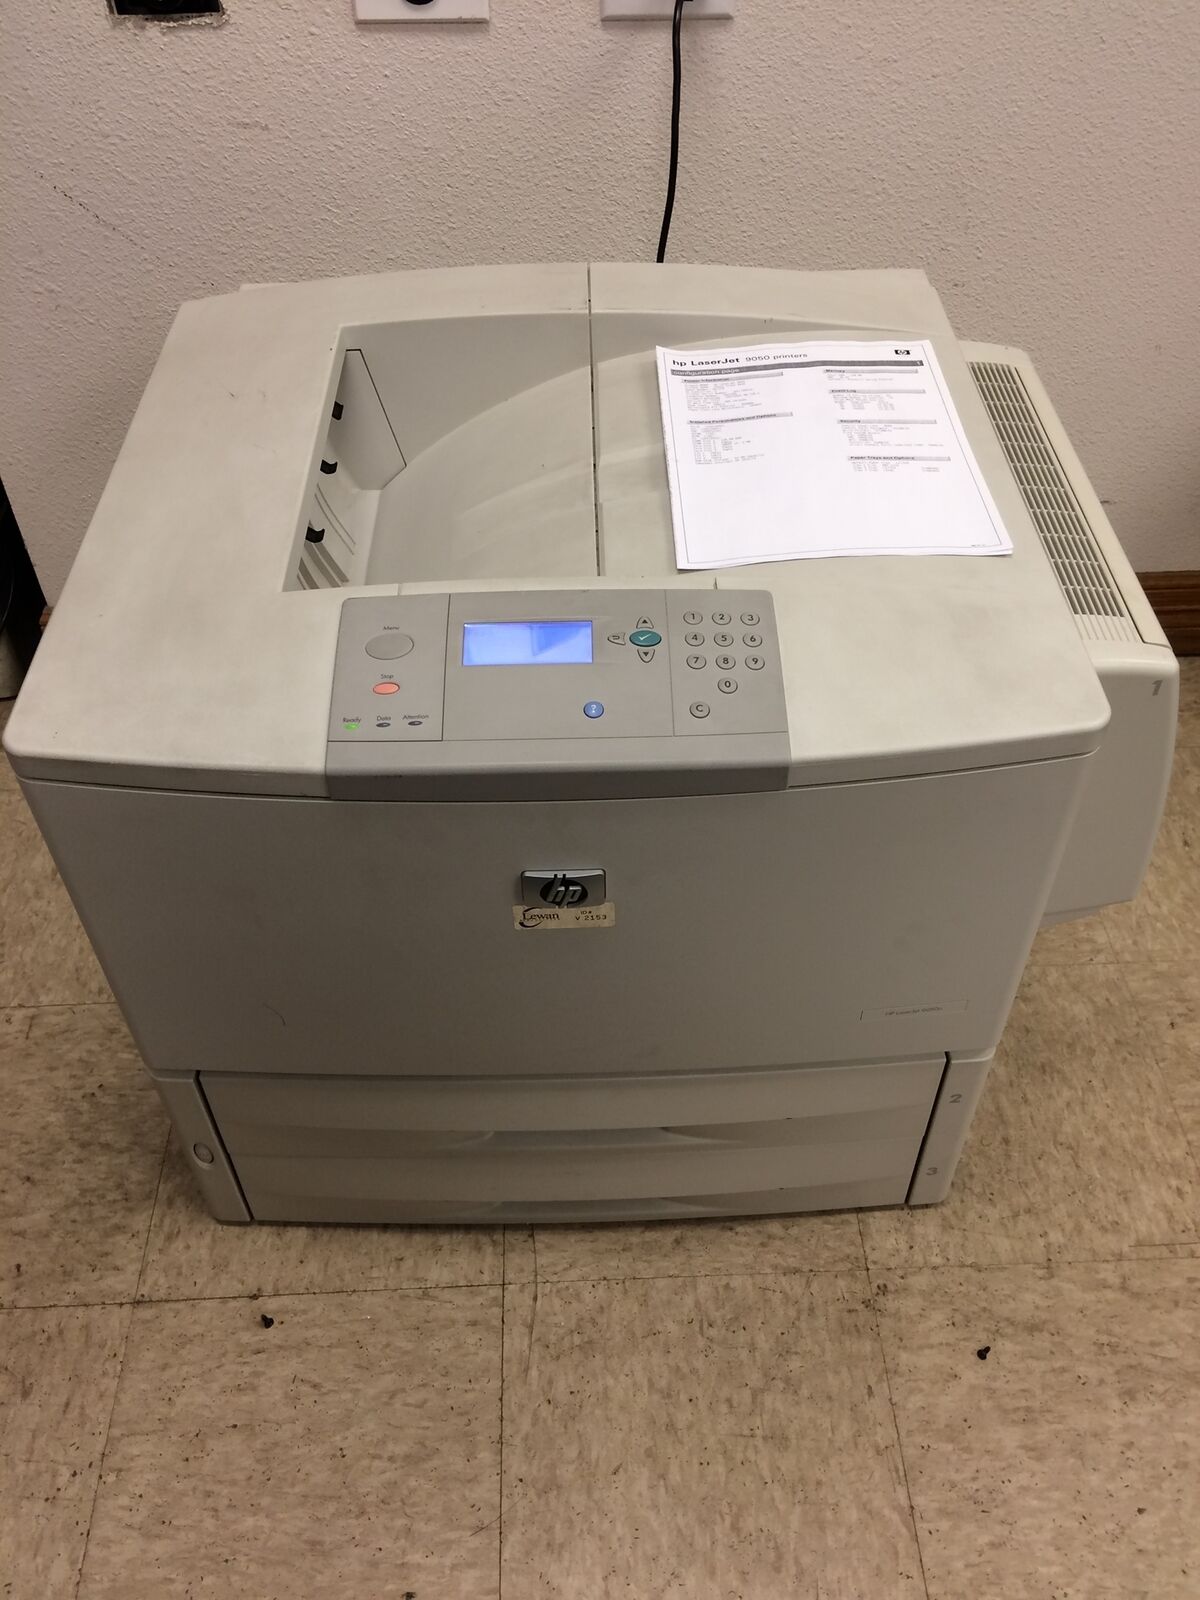 Hp Laserjet 9050N Printer Q3722a 128 Mb Pages:168213 Used Working Work Horse